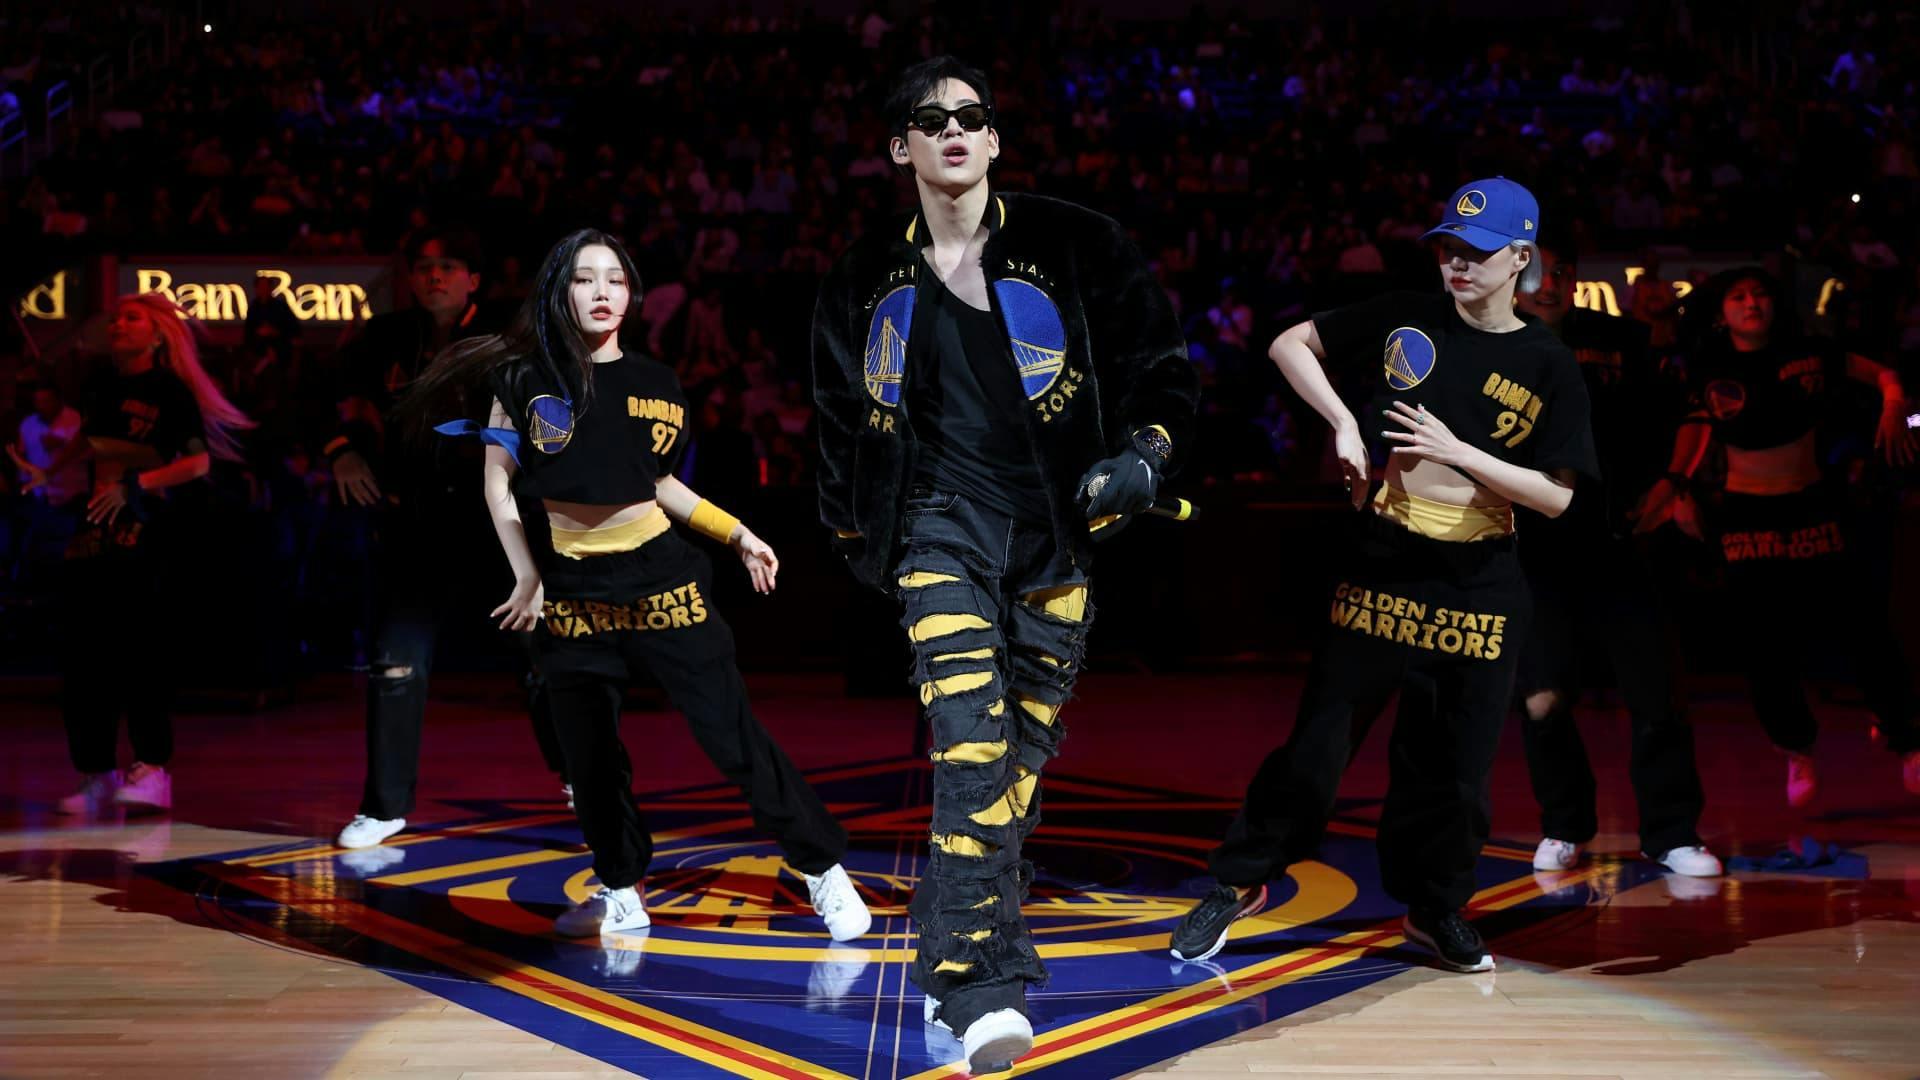 BamBam performs at Golden State Warriors halftime at Chase Center